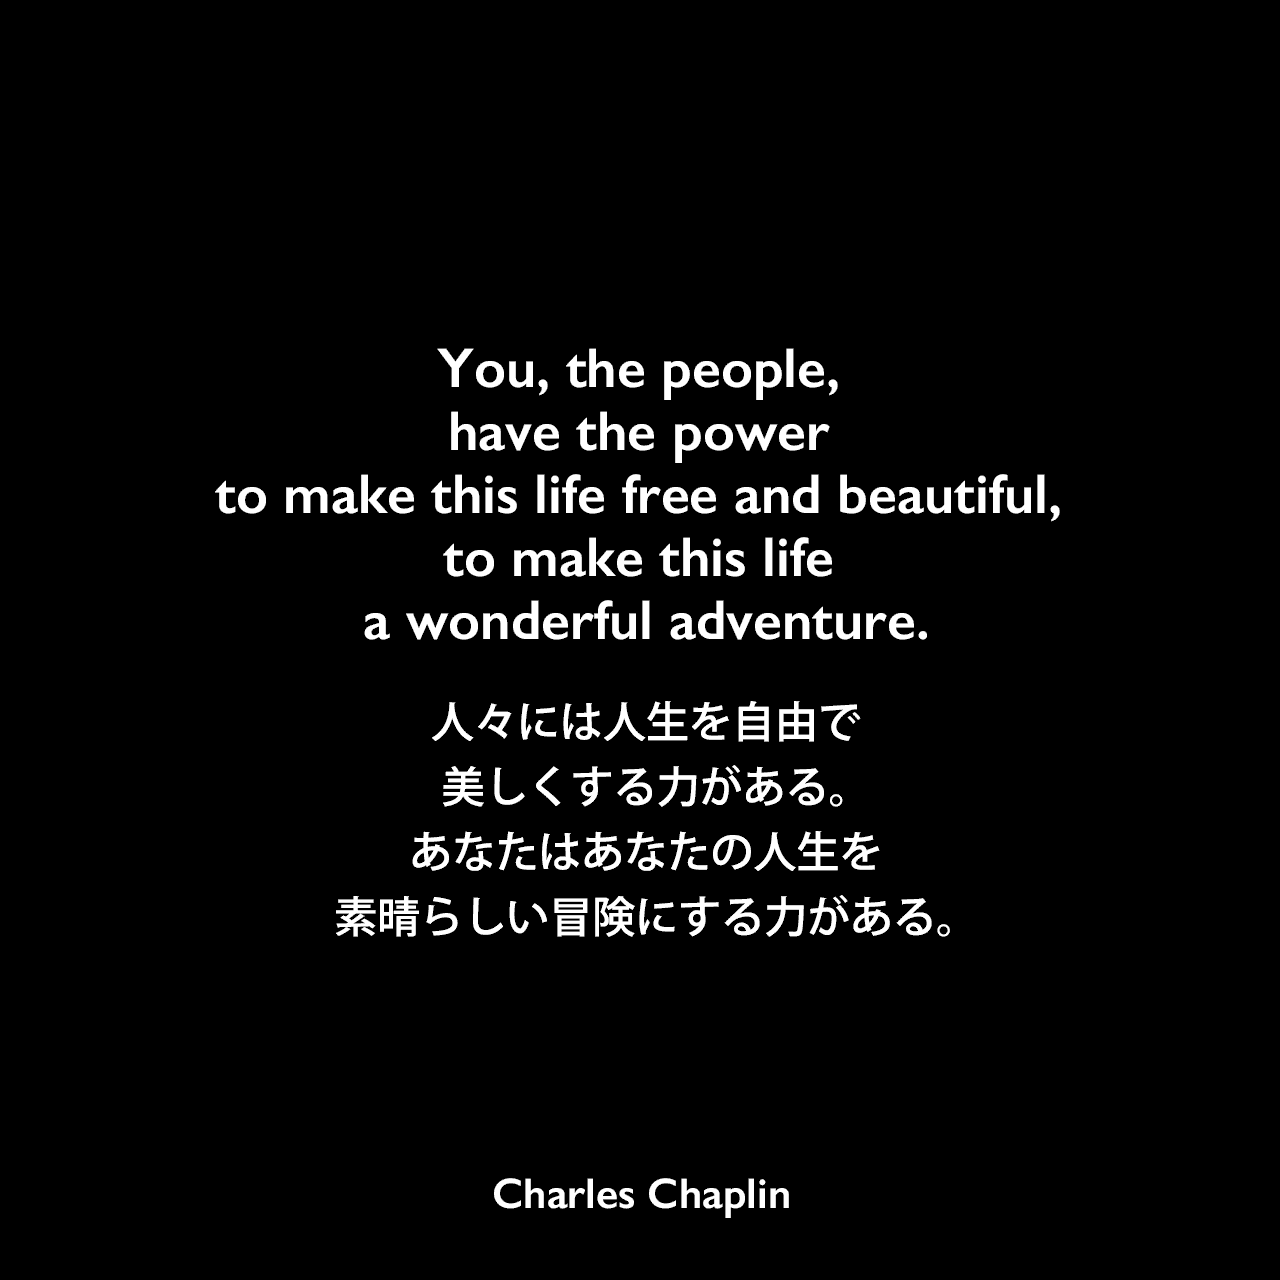 You, the people, have the power to make this life free and beautiful, to make this life a wonderful adventure.人々には人生を自由で美しくする力がある。あなたはあなたの人生を素晴らしい冒険にする力がある。Charles Chaplin